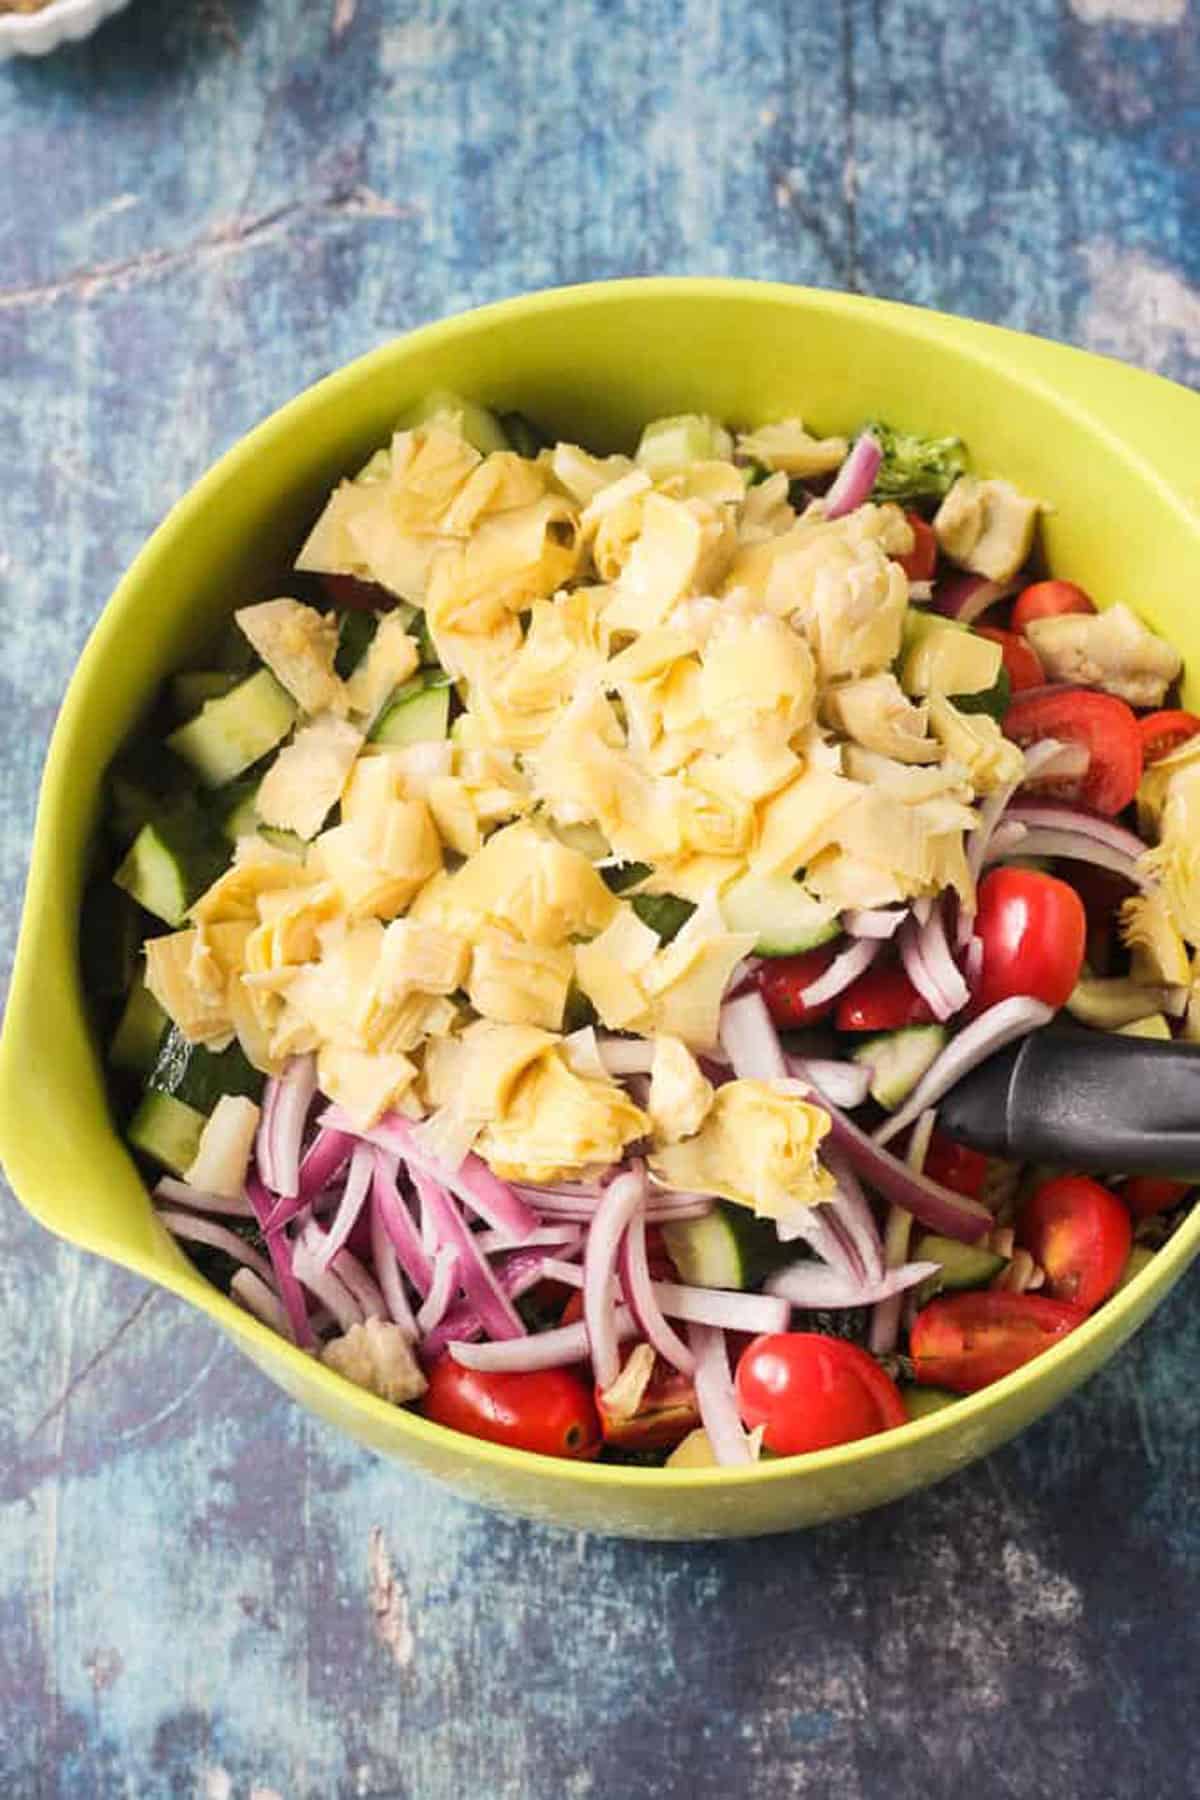 Chopped artichokes, tomatoes, cucumbers, and sliced red onion in a green mixing bowl.